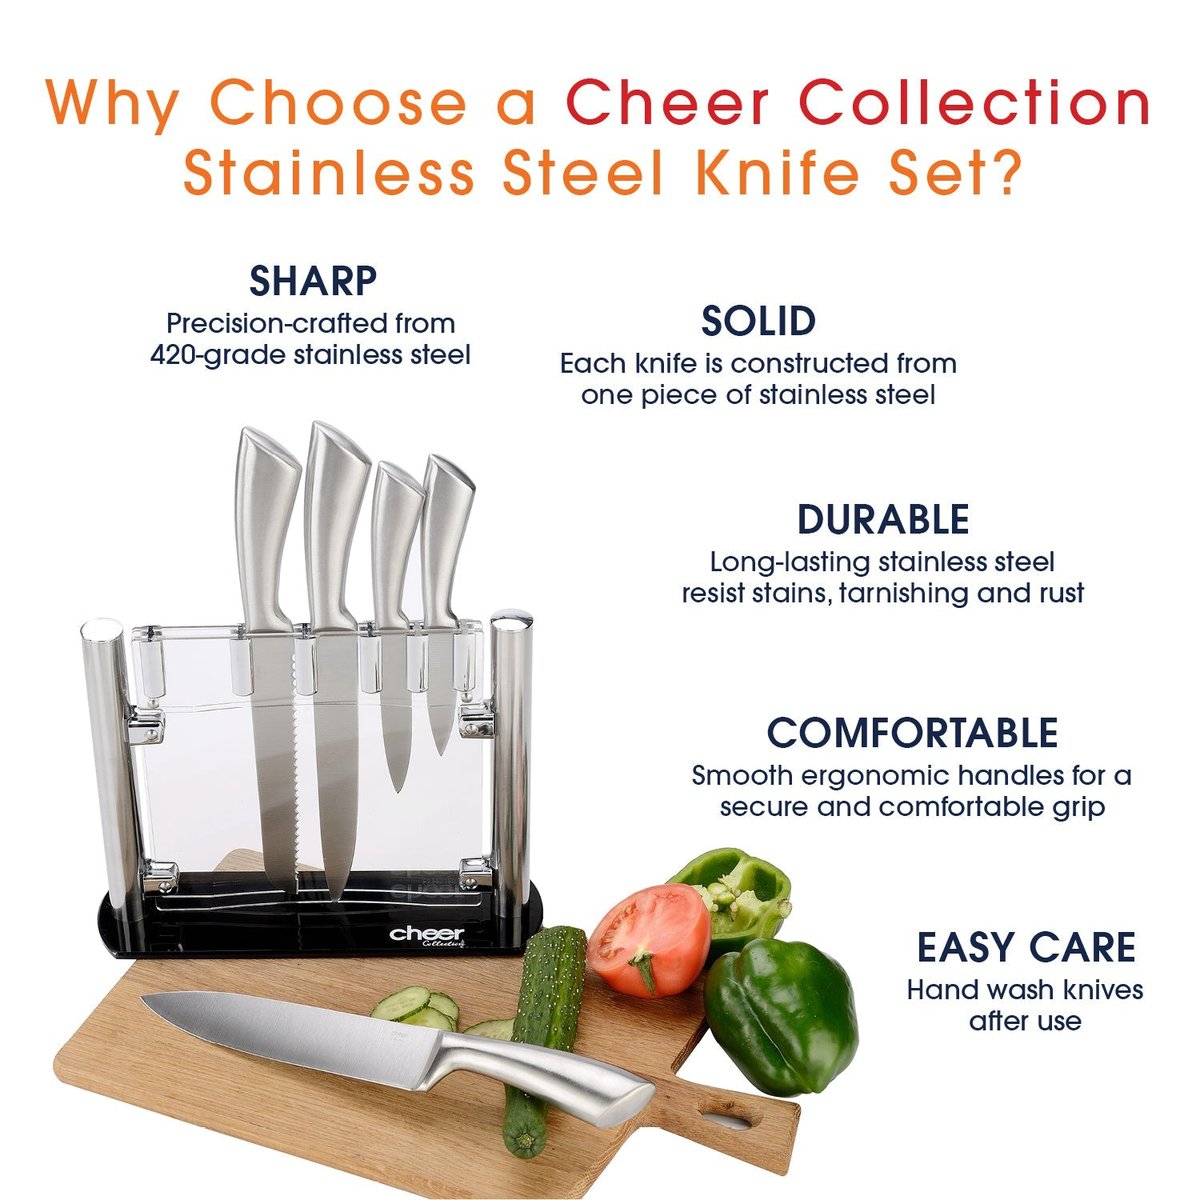 https://images.verishop.com/cheer-collection-6pc-stainless-steel-kitchen-knife-set/M00723169674331-4268583332?auto=format&cs=strip&fit=max&w=1200